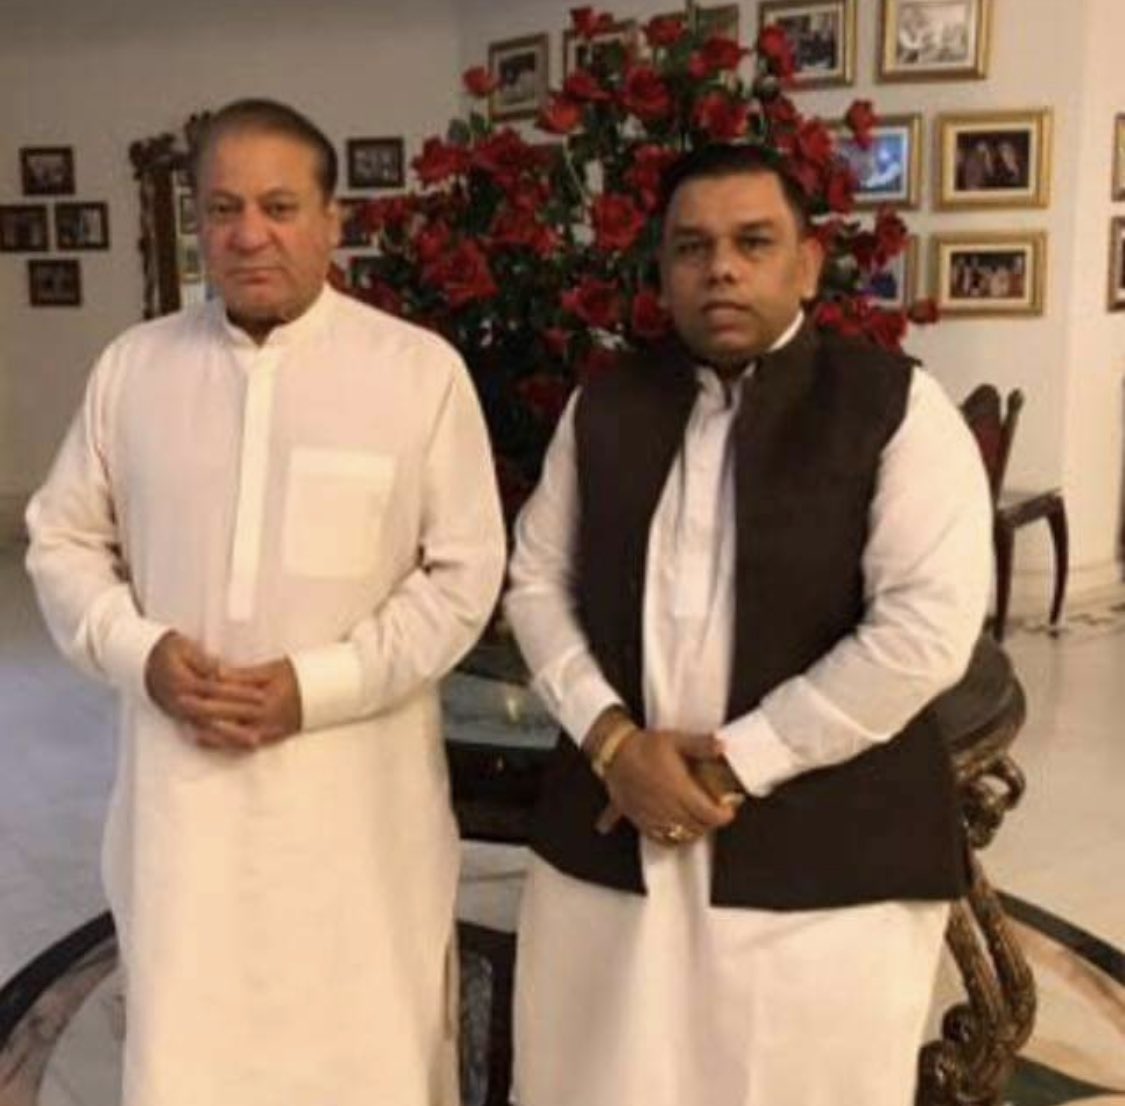 Finally, here is this fraudster Imran Saeed Sheikh with Nawaz Sharif himself, the so called “Imam” of PMLN, 3time Prime Minister & a convicted criminal as per the Supreme Court of Pakistan.-All info & images posted here are obtained via publicly available OSINT sources./15